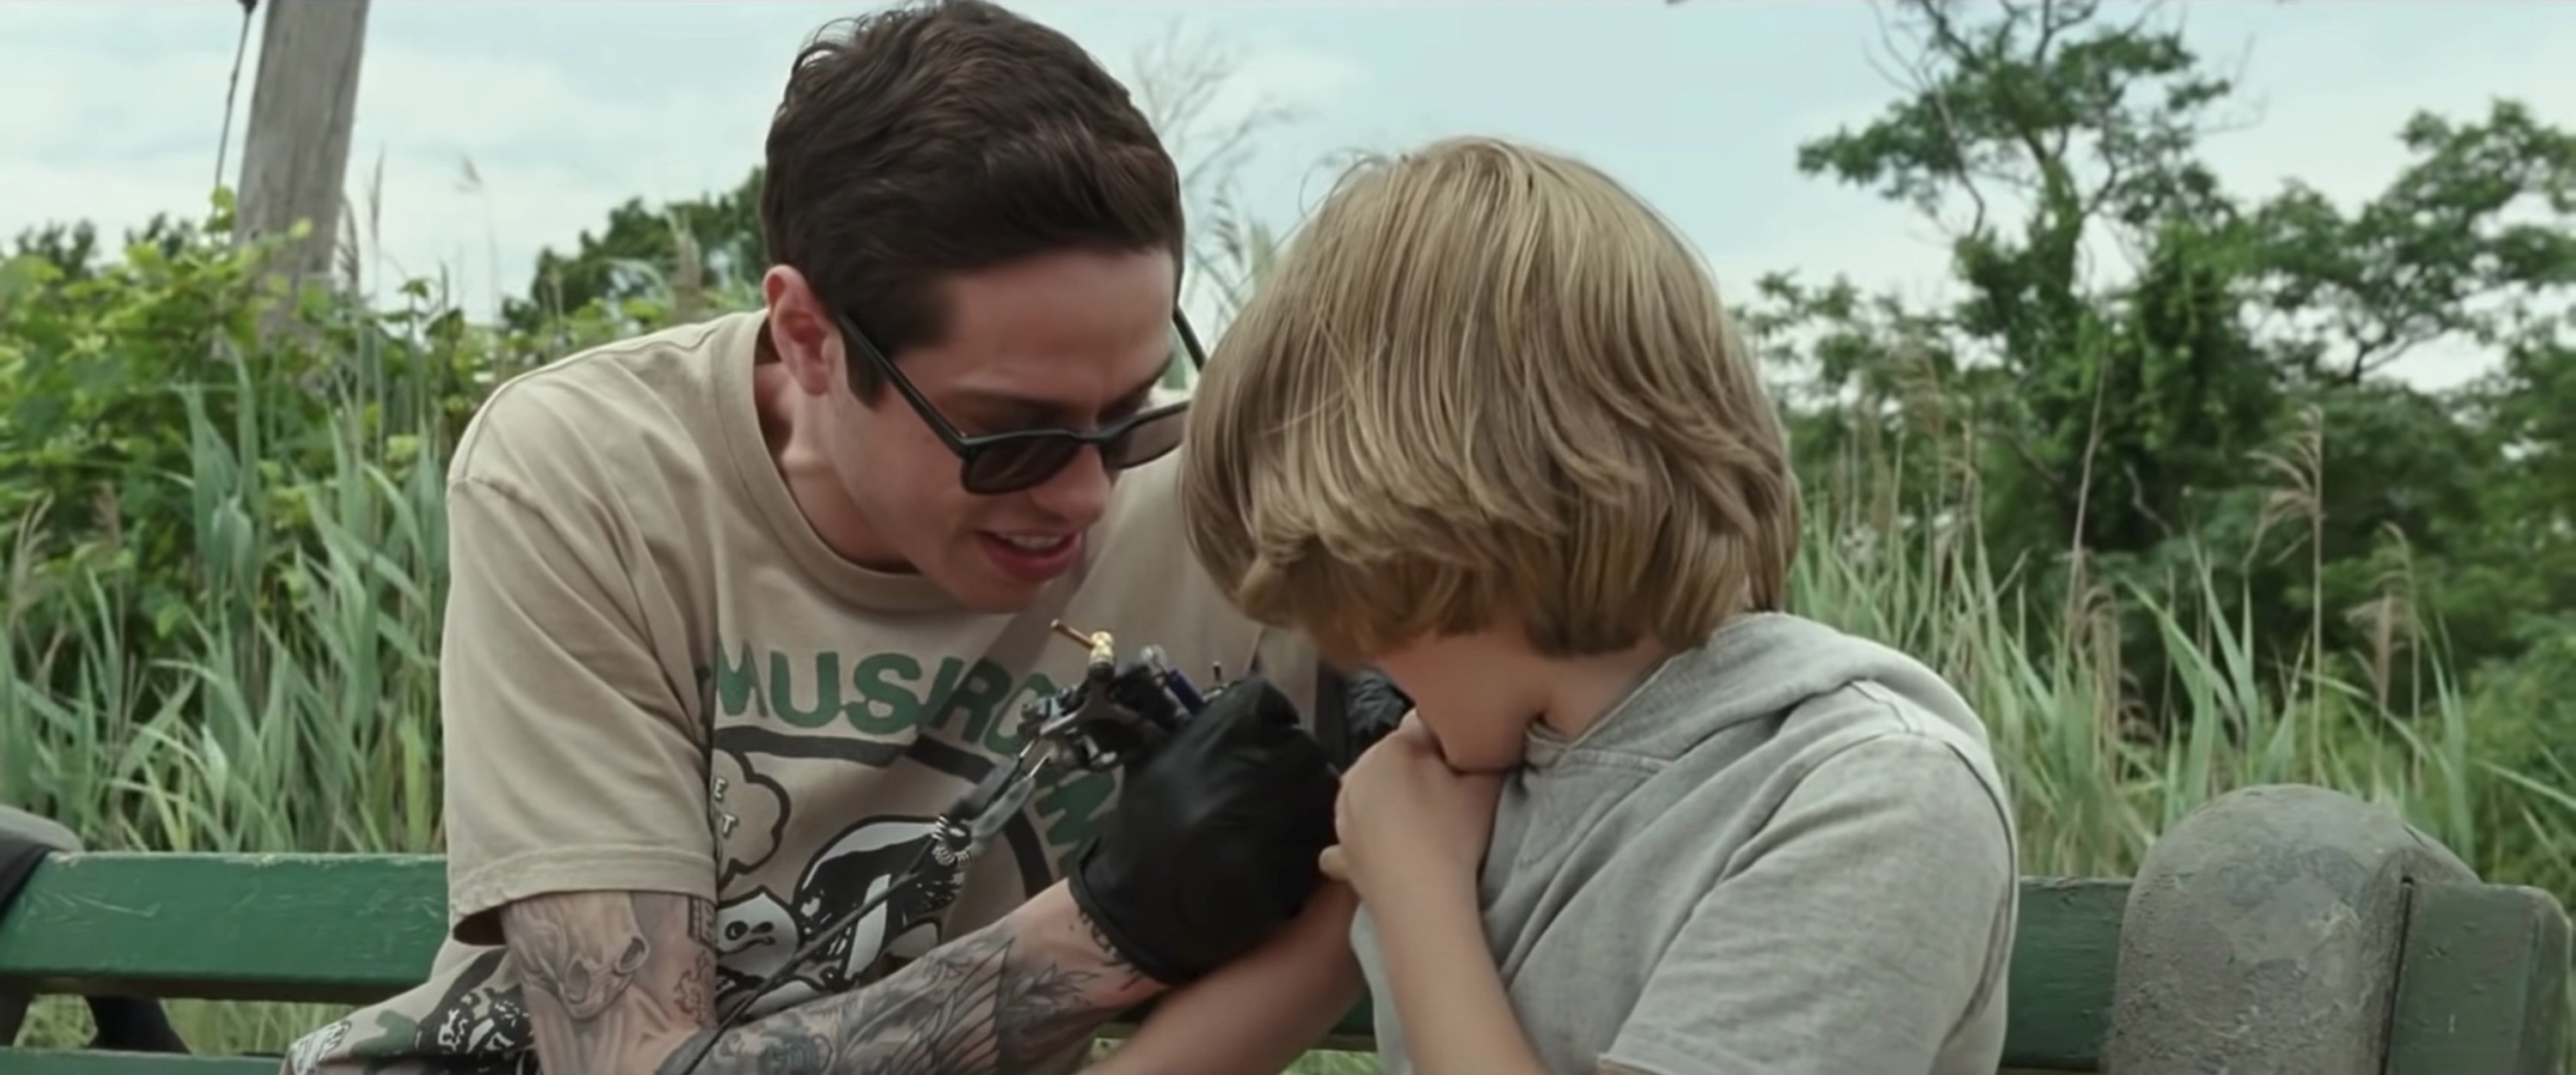 Pete davidson tattoos a child in &quot;King of Staten Island&quot;